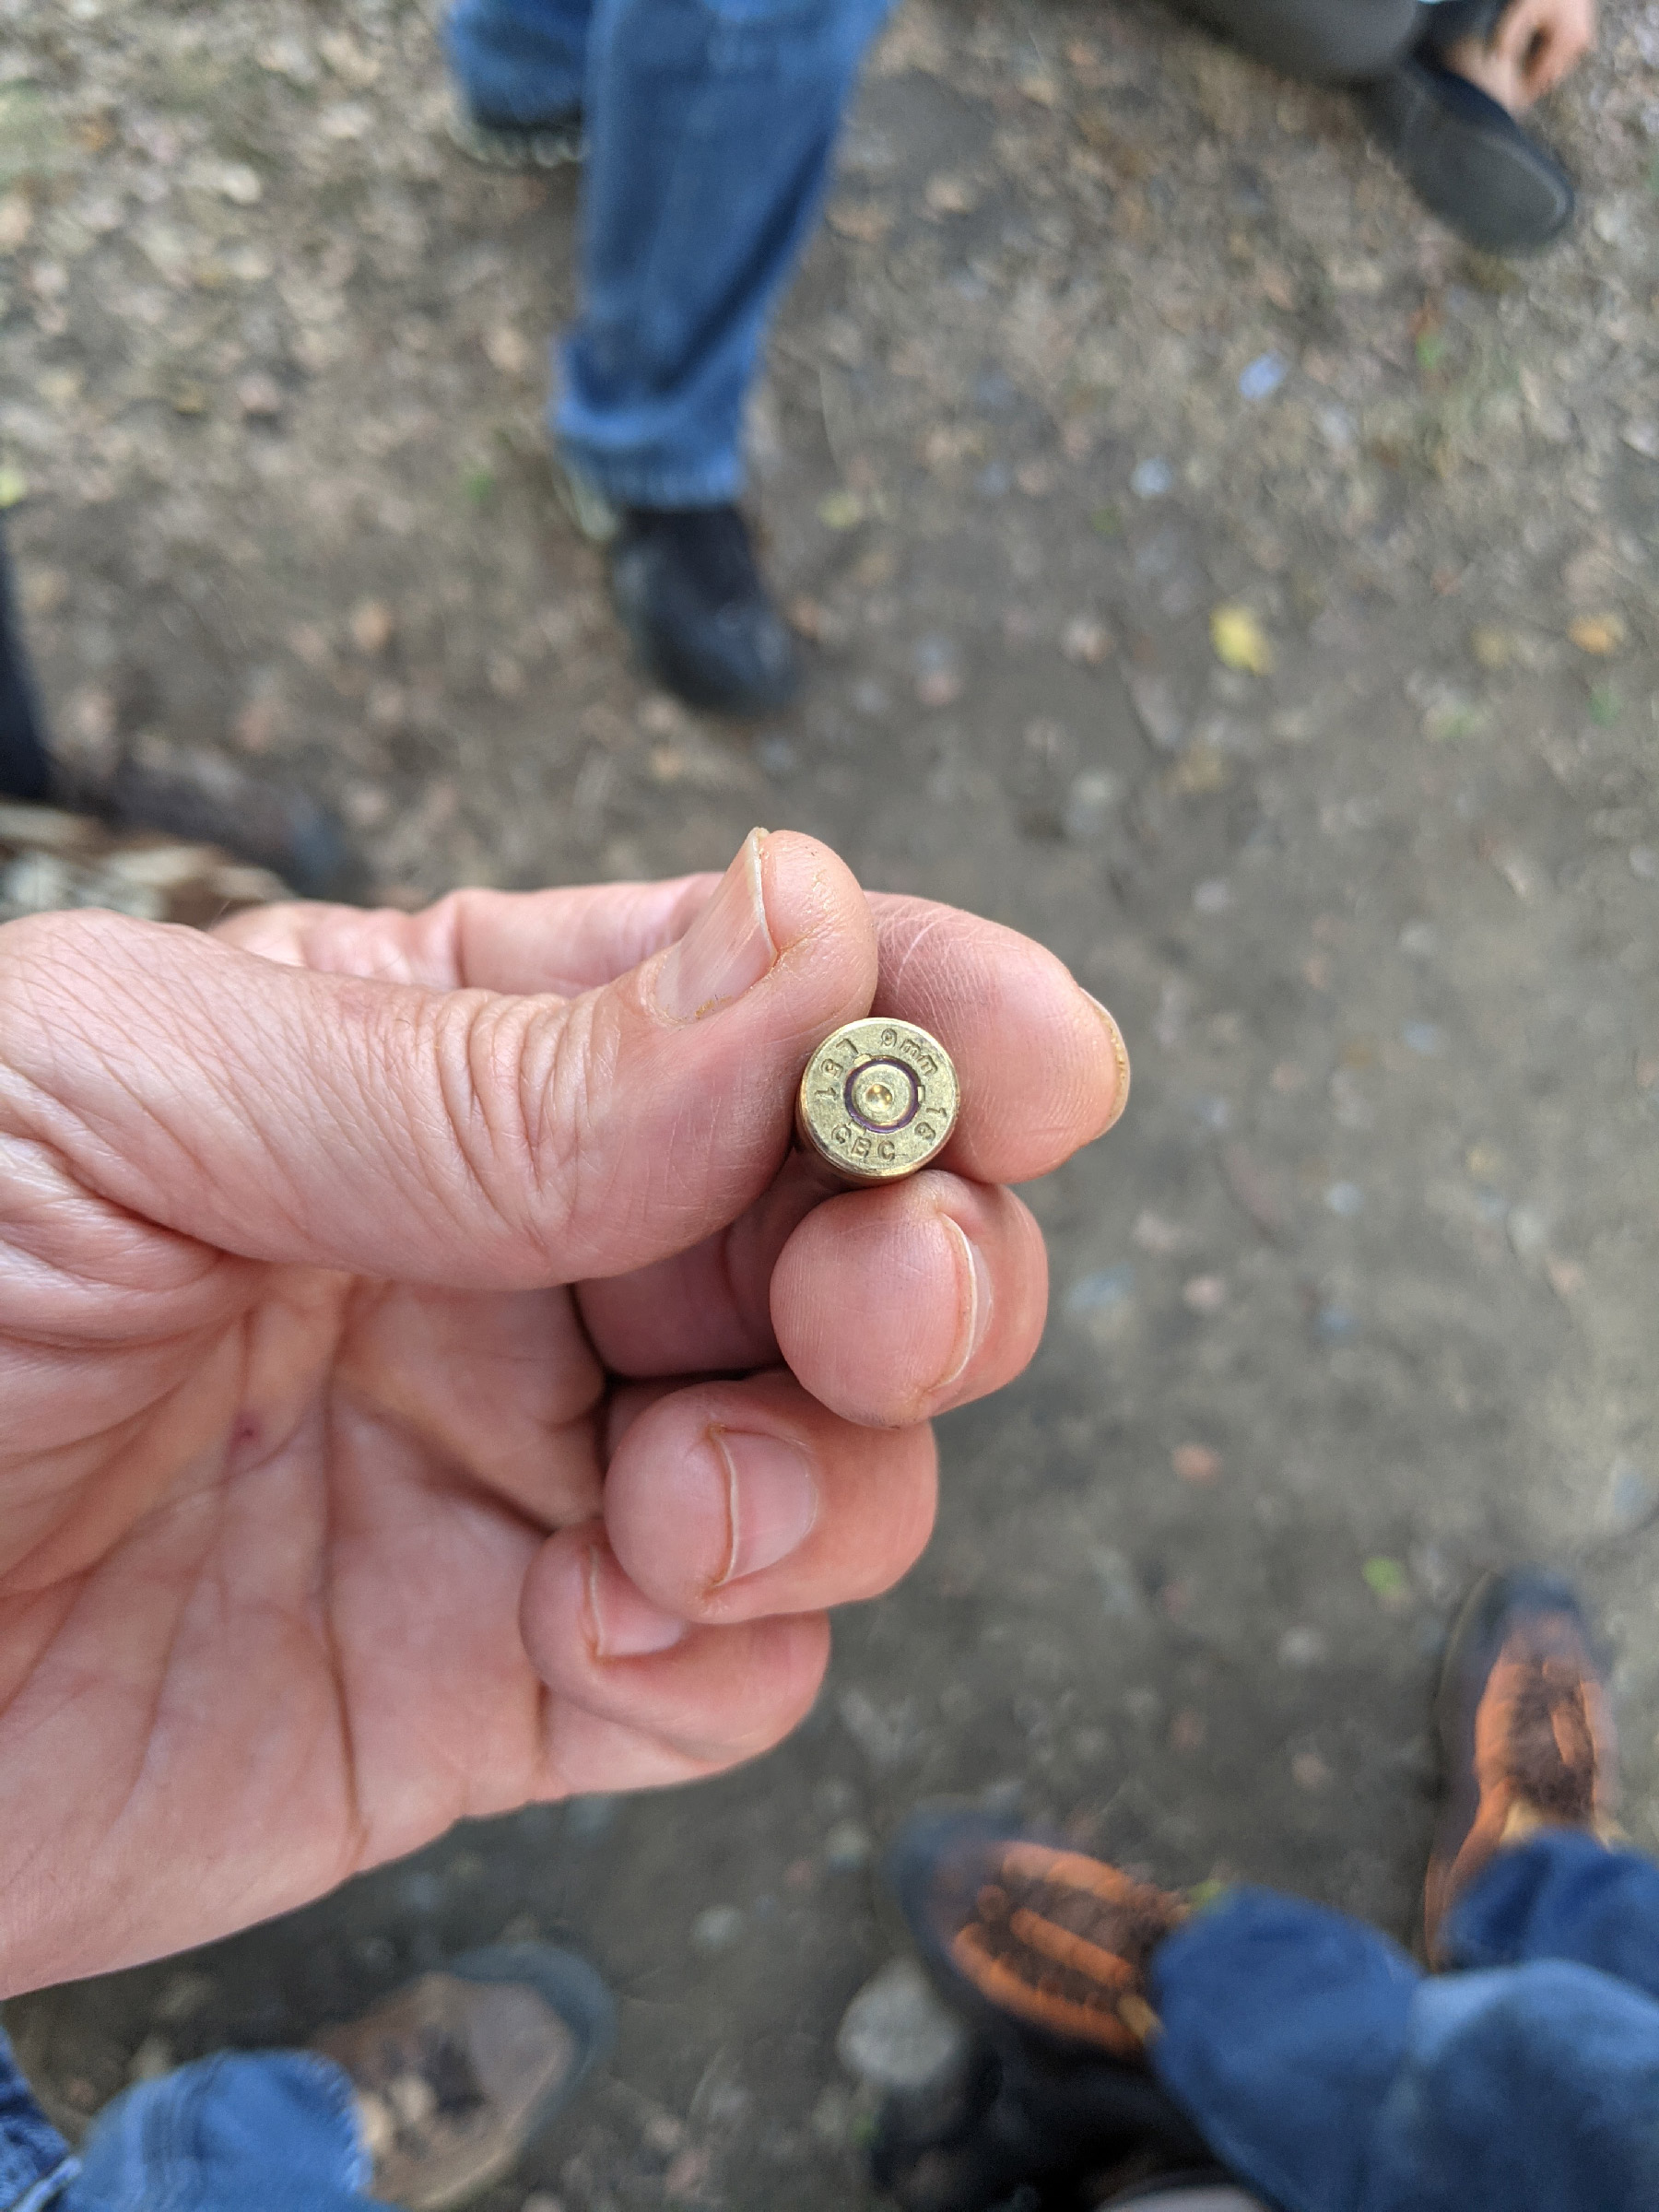 Evidence of a 9mm round fired at protesters, Valle del Cauca, Colombia, May 2021.